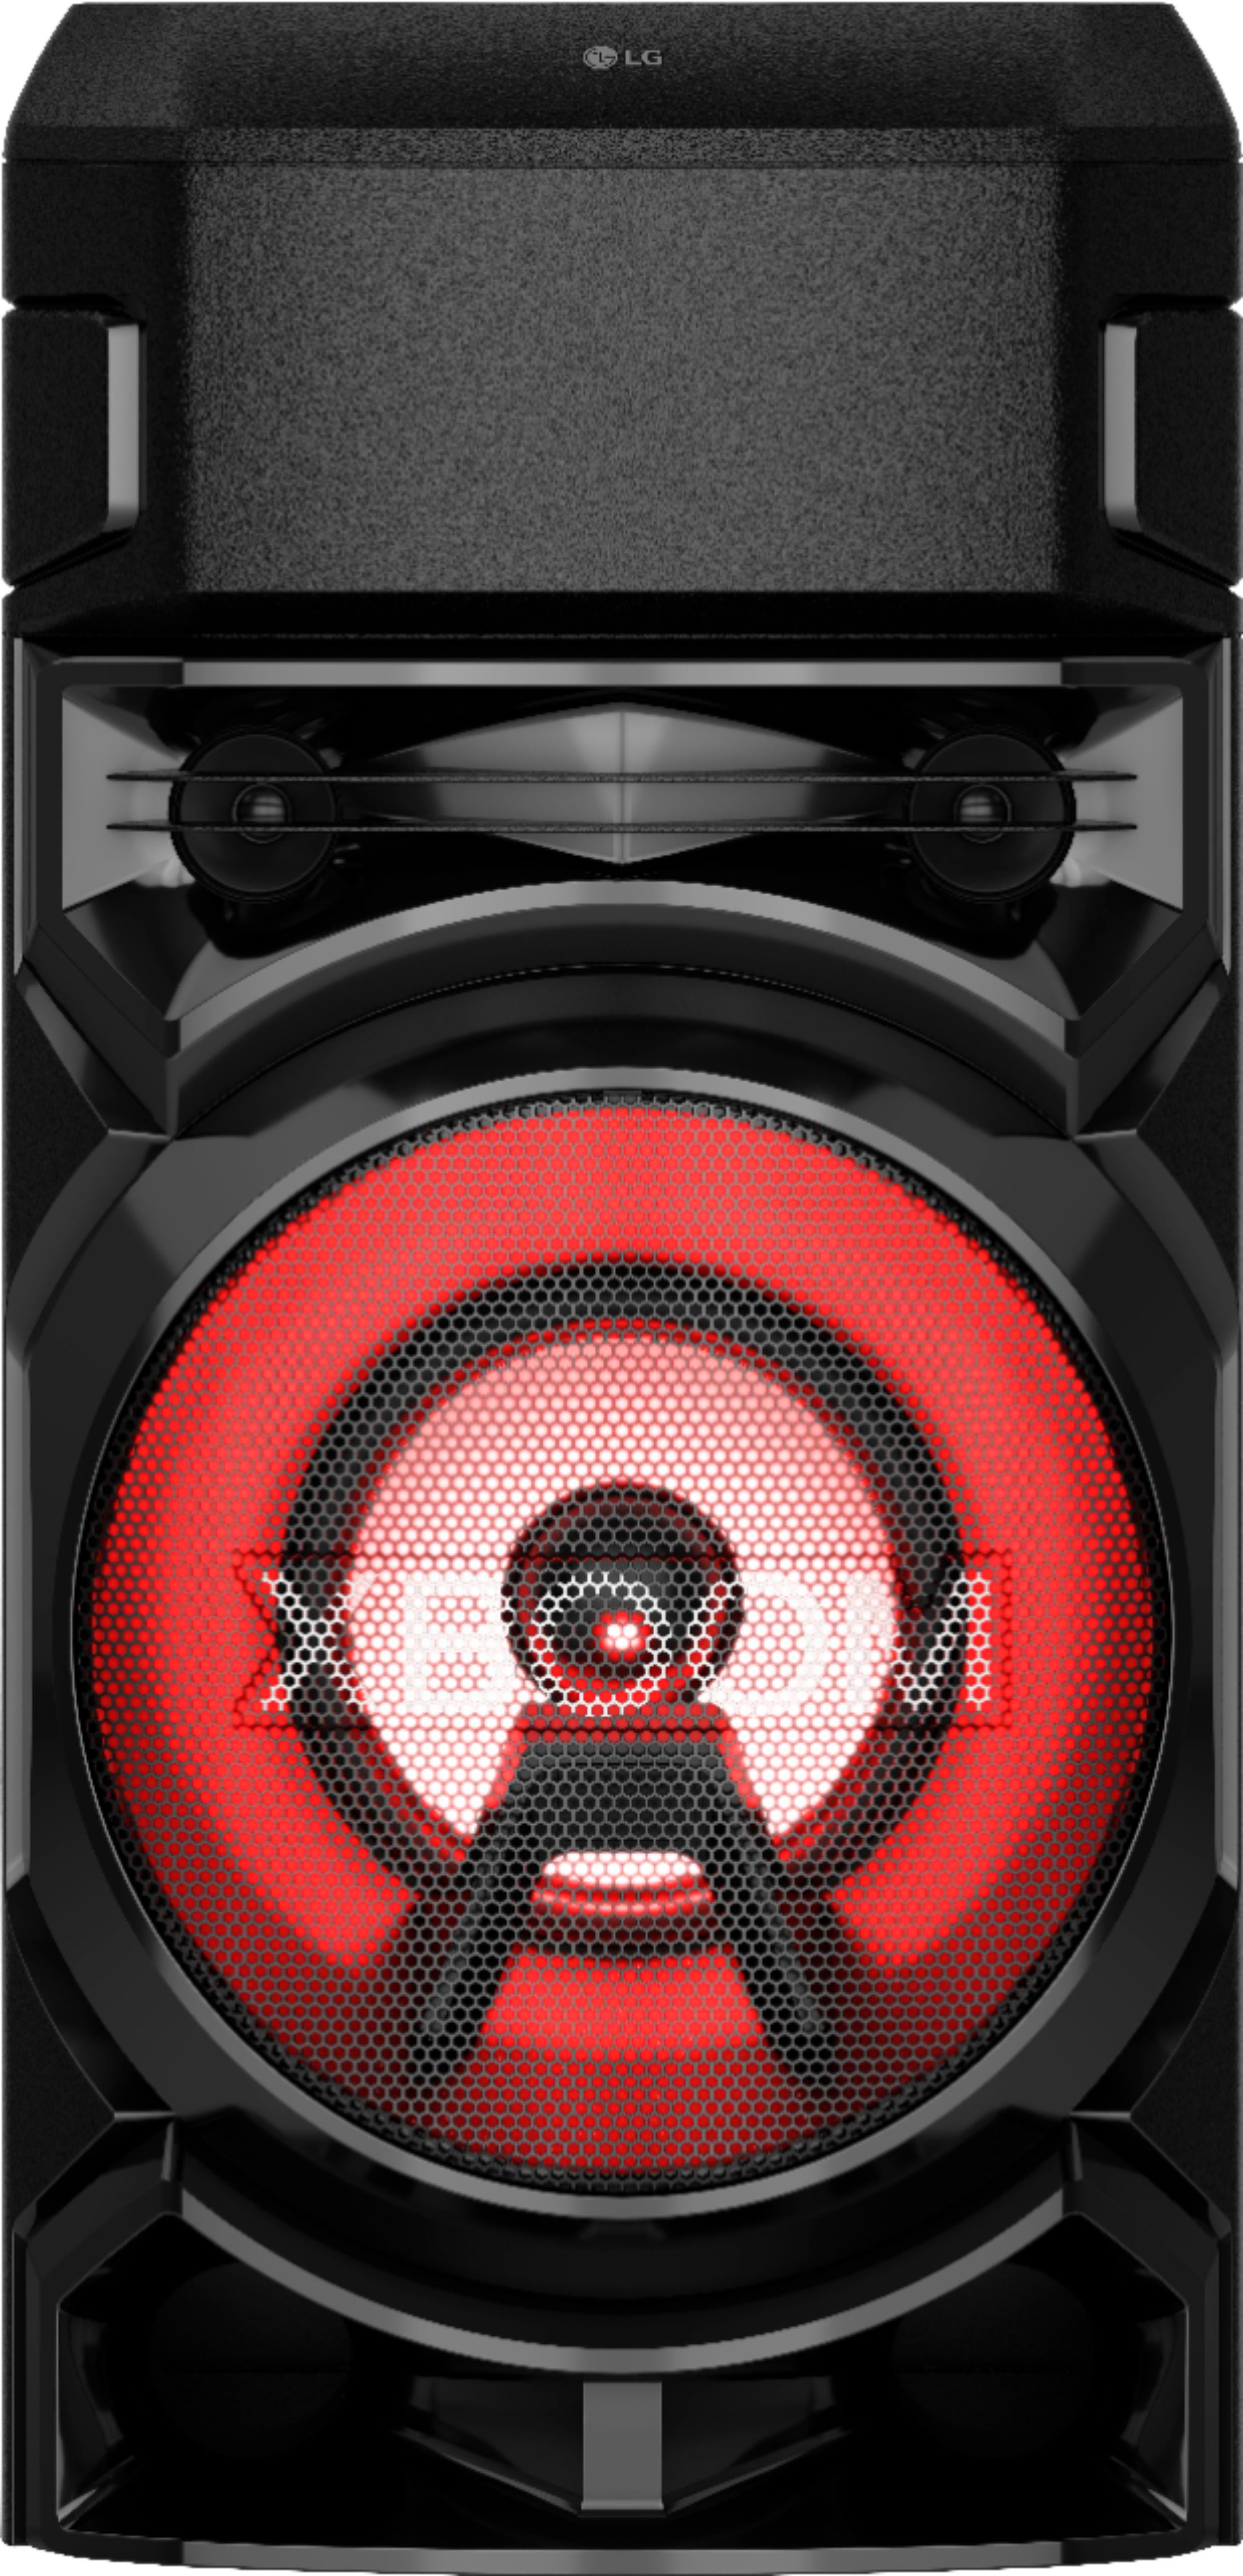 XBOOM RN7 Audio System with Bluetooth and Bass Blast